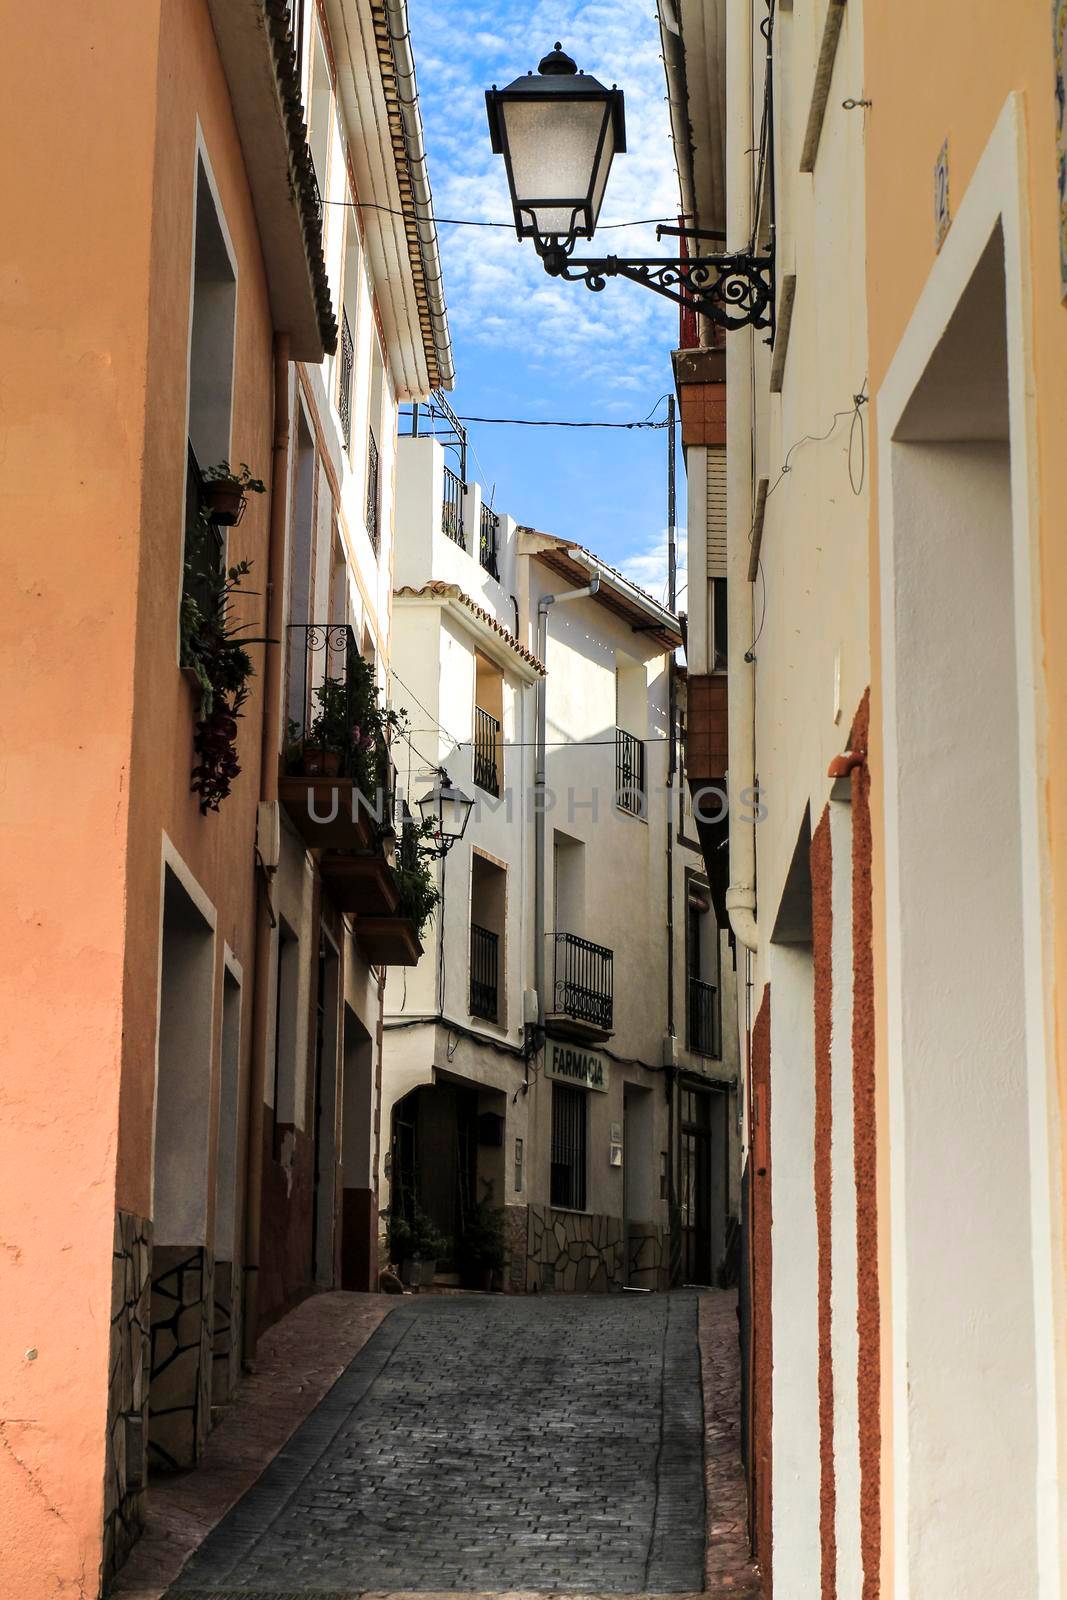 Beniarda, Alicante, Spain- November 26, 2021: Narrow Street and typical whitewashed facades of the town of Beniarda in Alicante, Spain